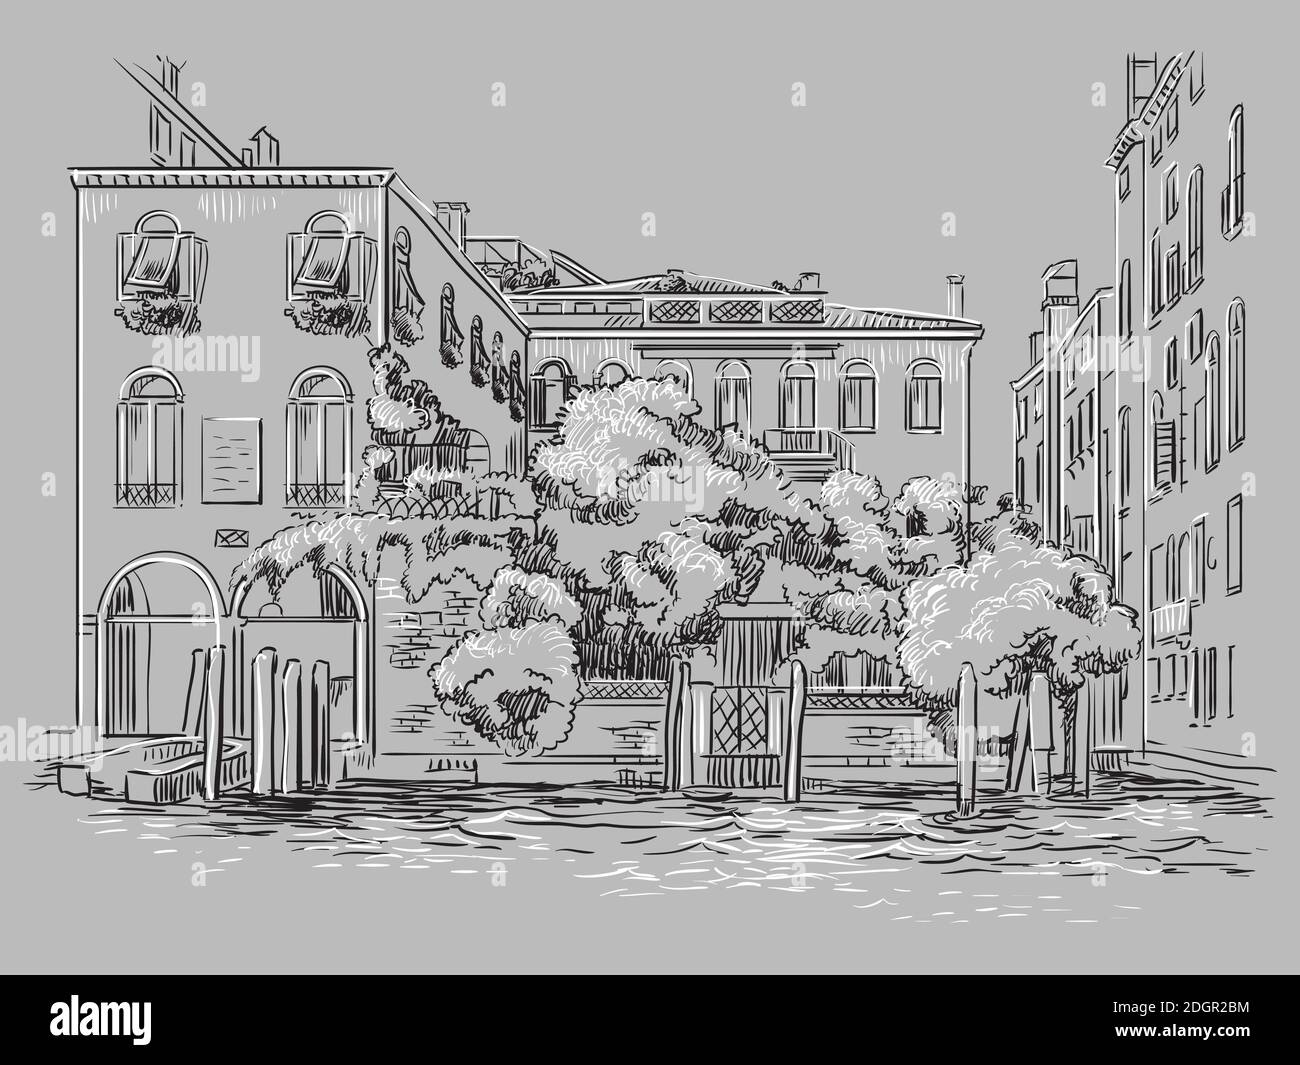 Vector hand drawing illustration of Venice. Venice cityscape hand drawn sketch in monochrome colors isolated on gray background. Travel concept. For p Stock Vector